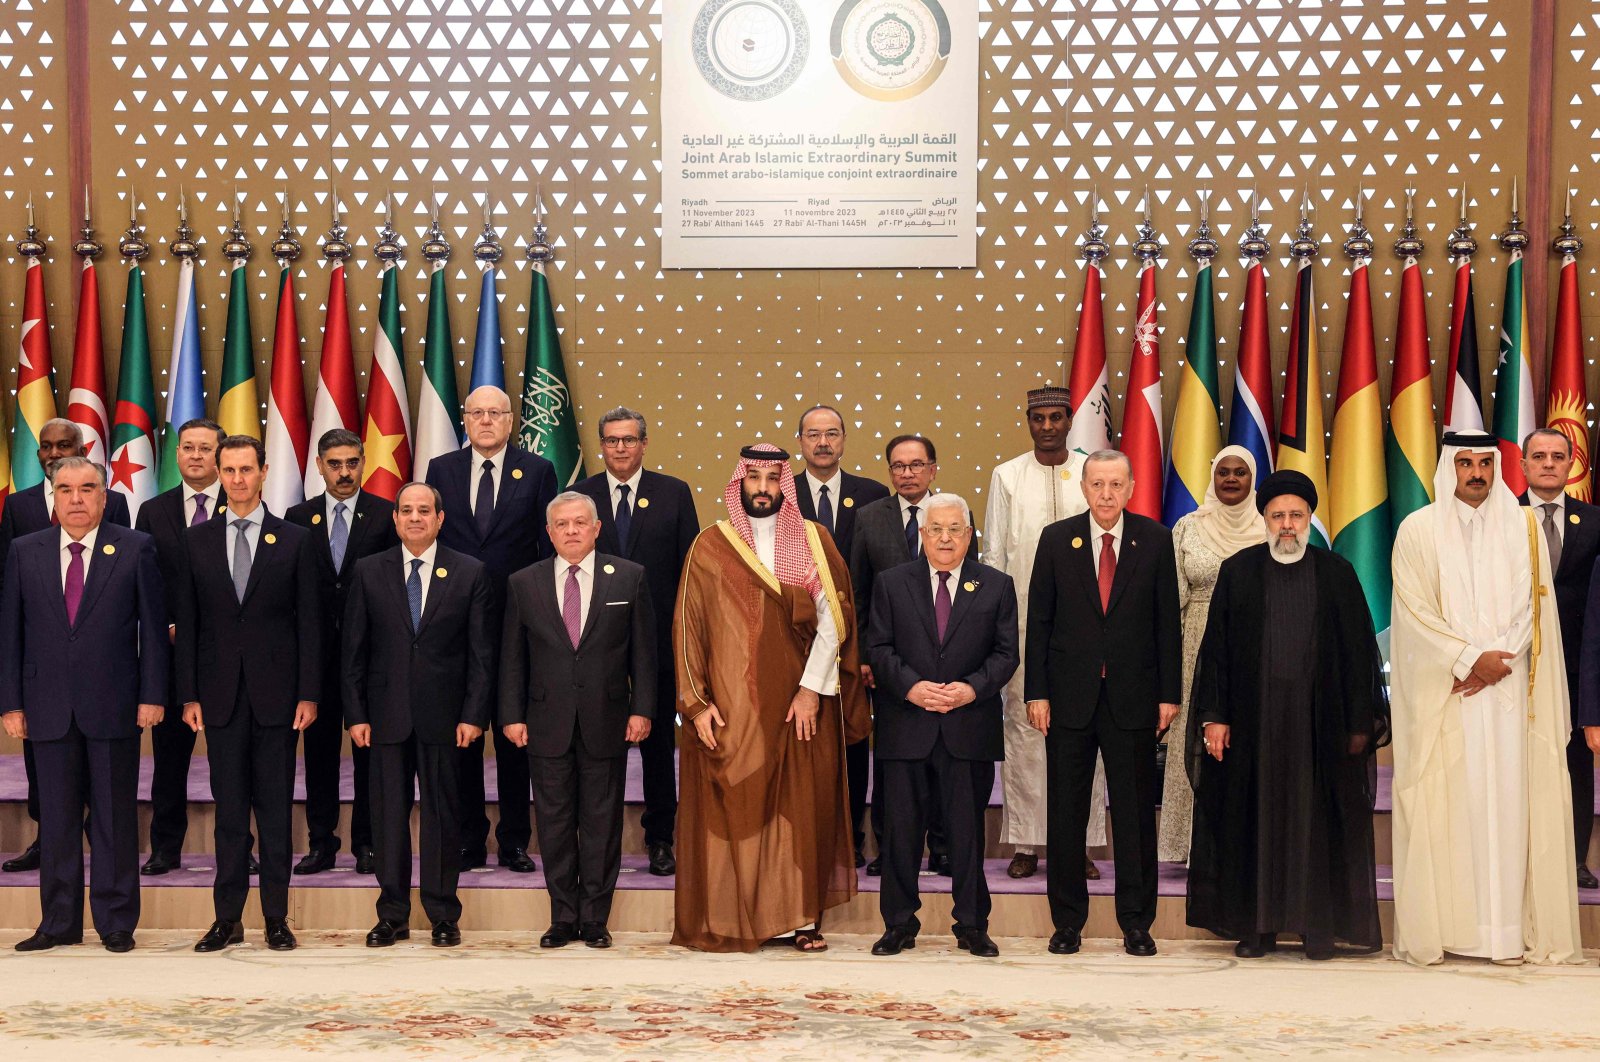 Leaders pose for a group picture ahead of an emergency meeting of the Arab League and the Organisation of Islamic Cooperation (OIC), Riyadh, Saudi Arabia, Nov. 13, 2023. (AFP Photo)